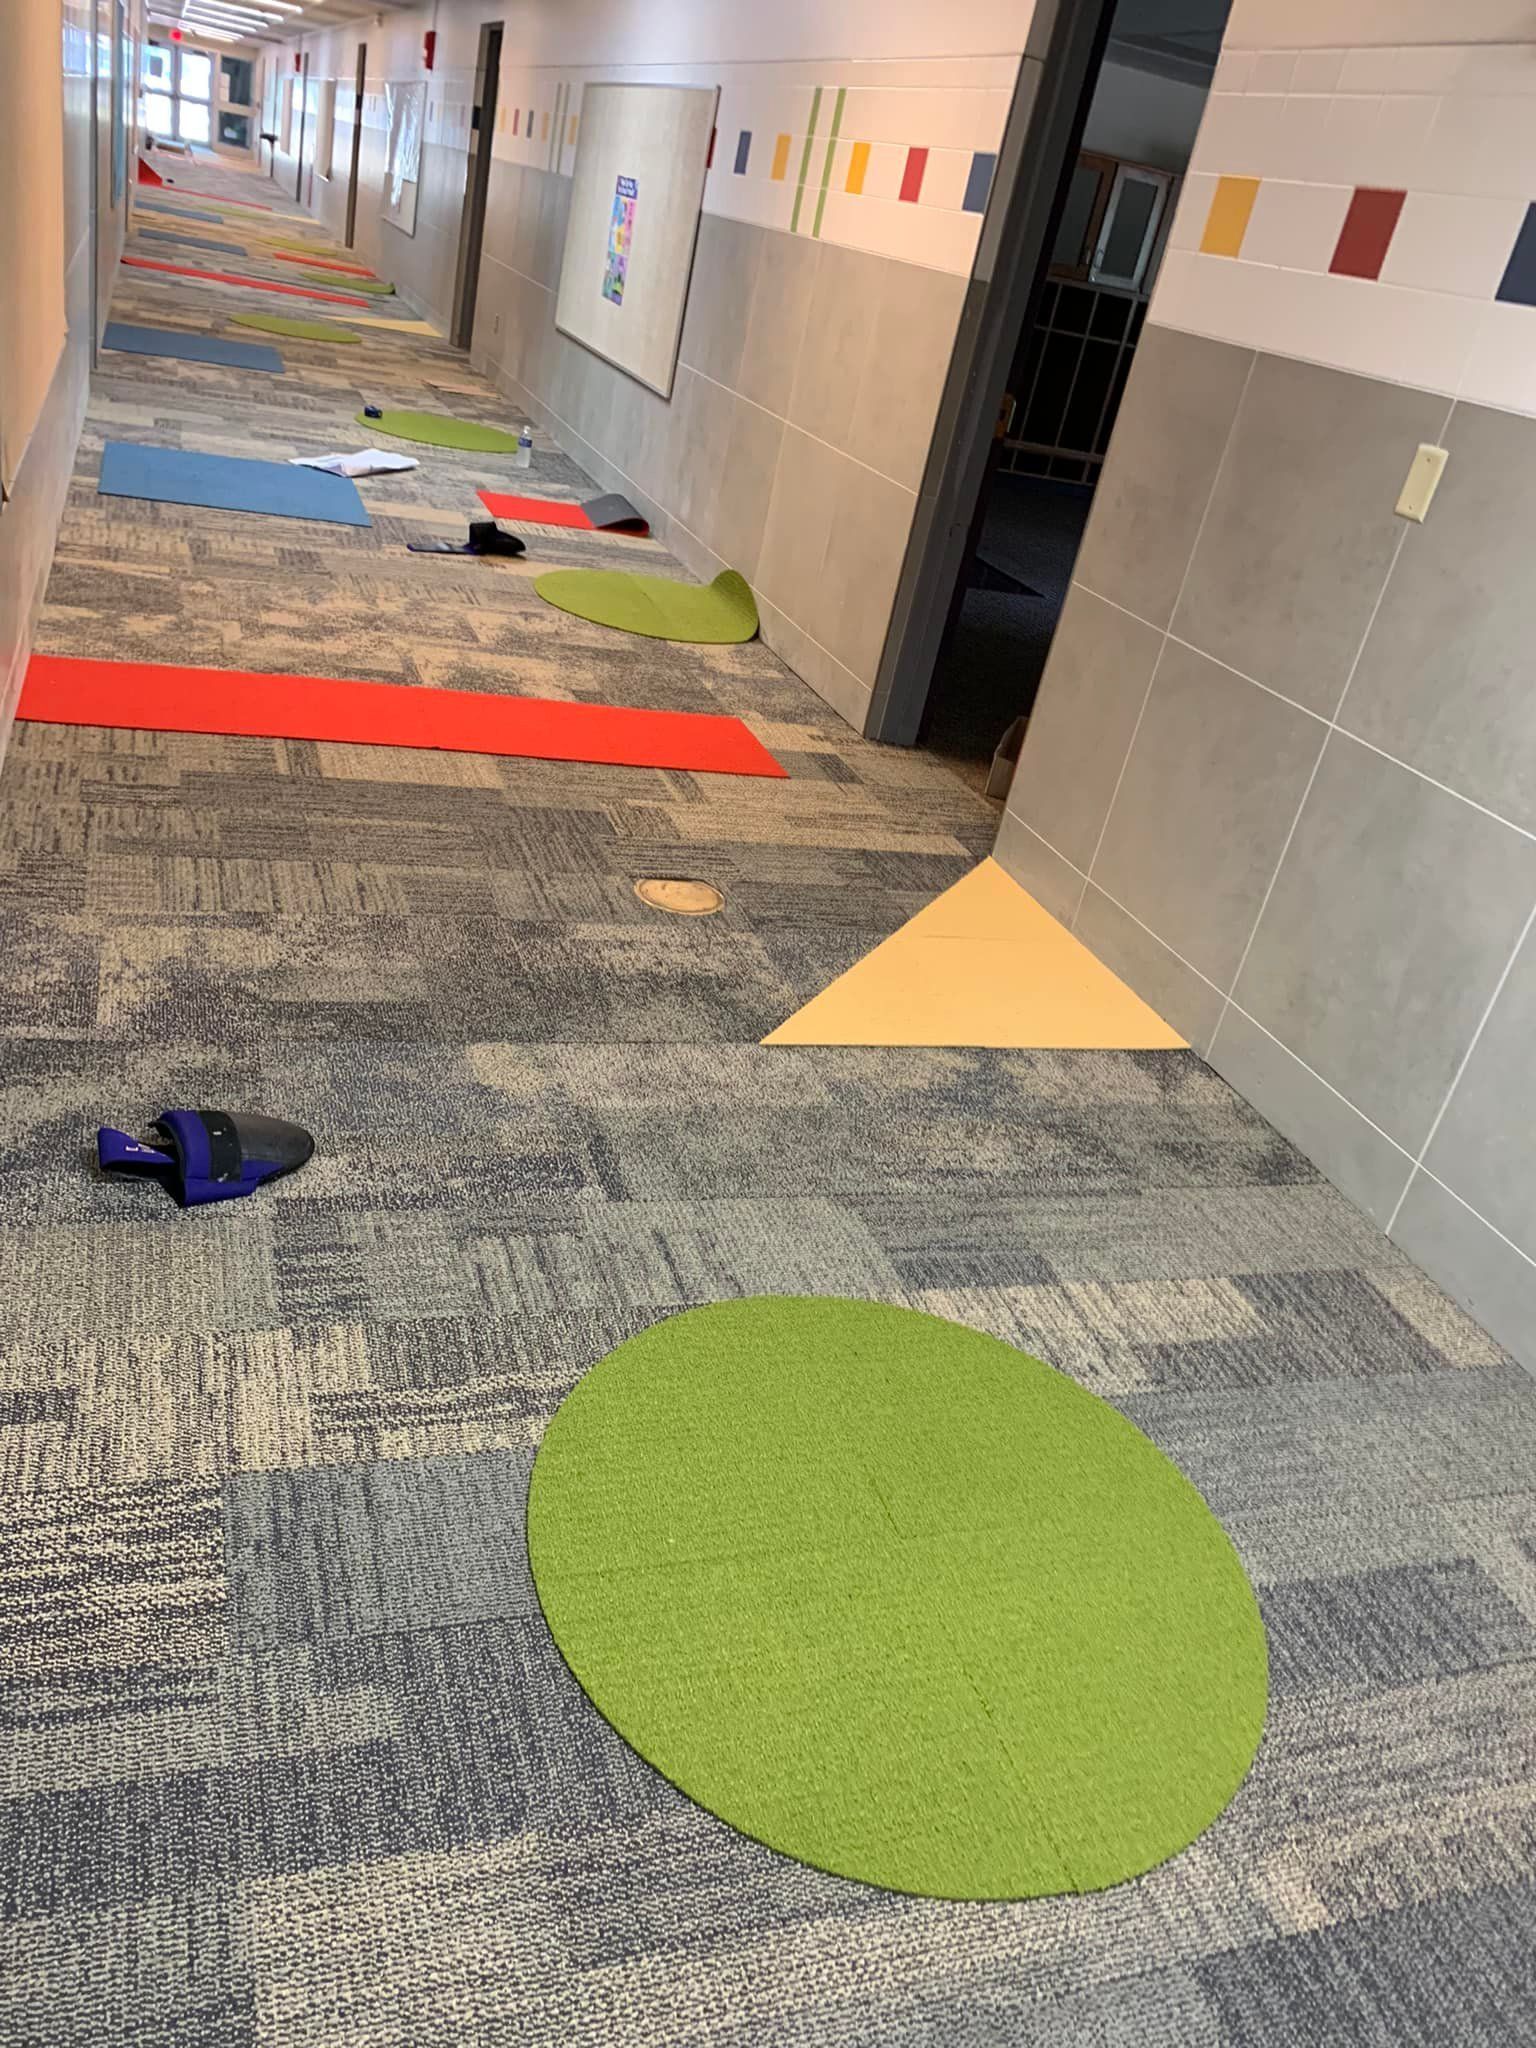 More shots of that creative and colorful carpet tile installation in the hospital hallway.